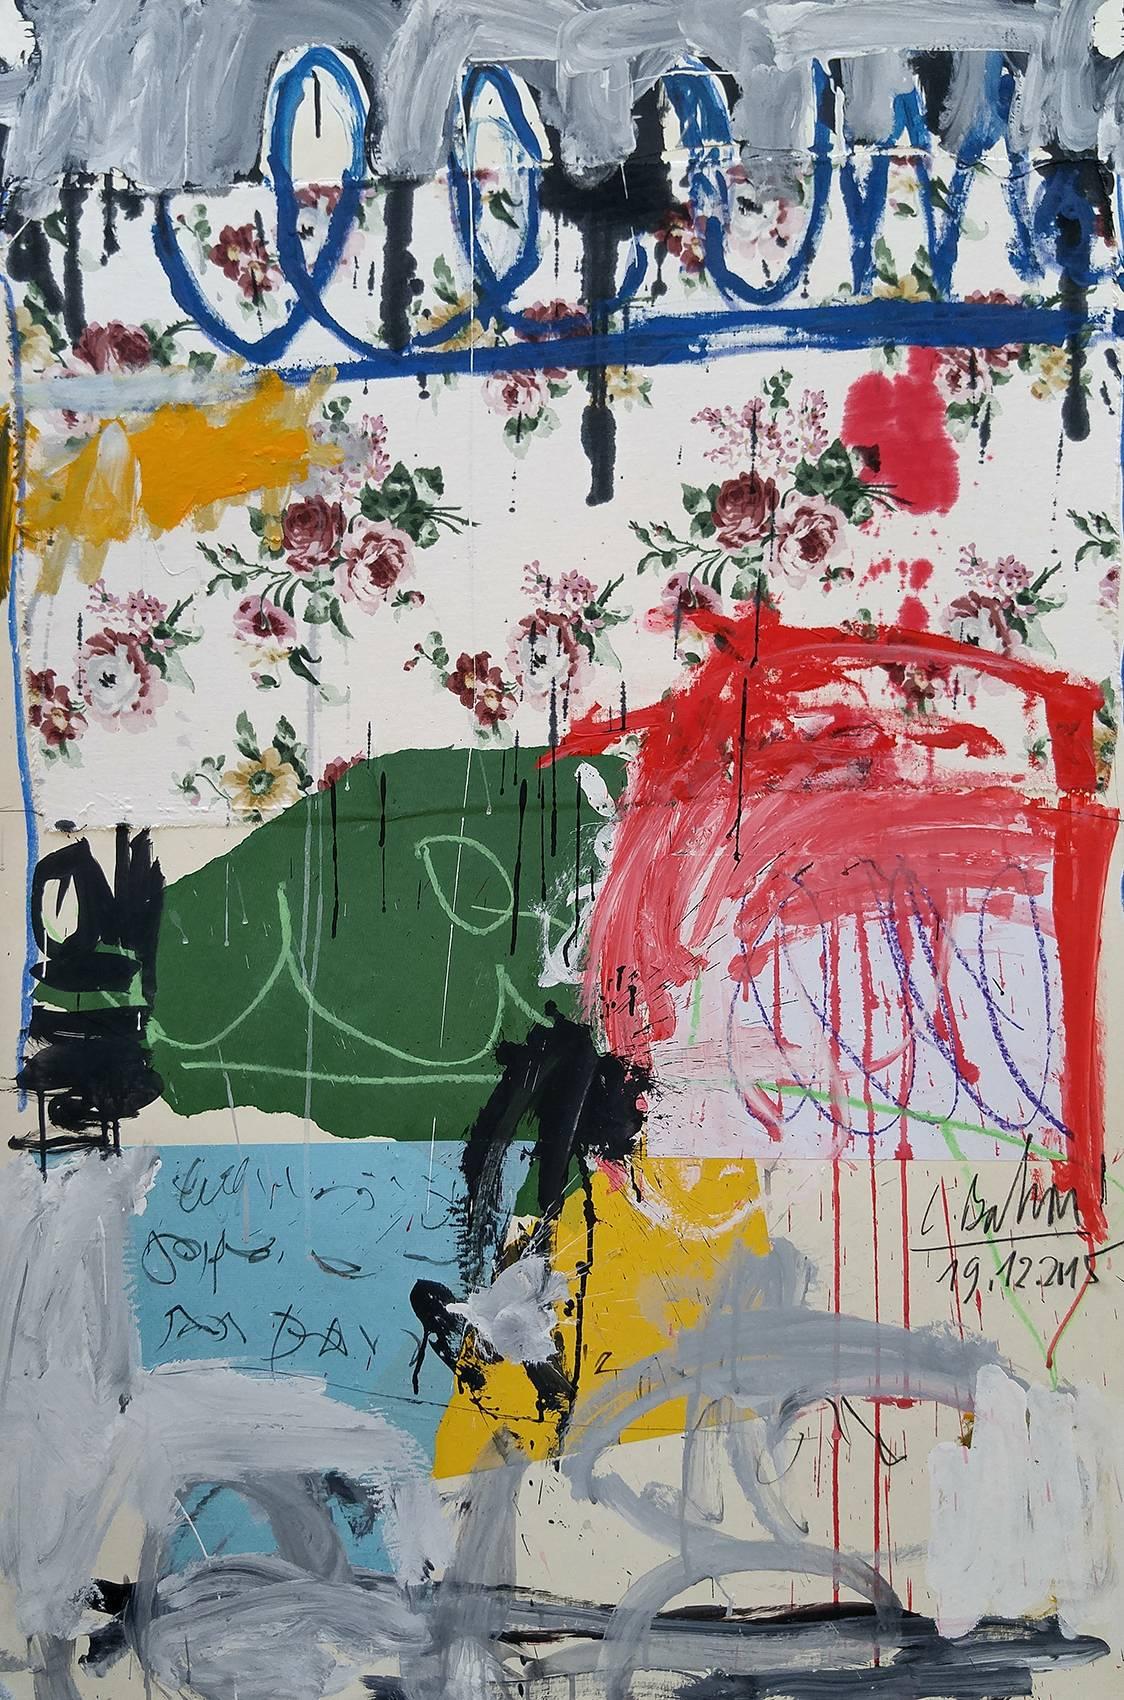 Christophe Abstract Painting - "Twombly Flowers in Springtime,  acrylic and collage 54x38" Framed under Plexi